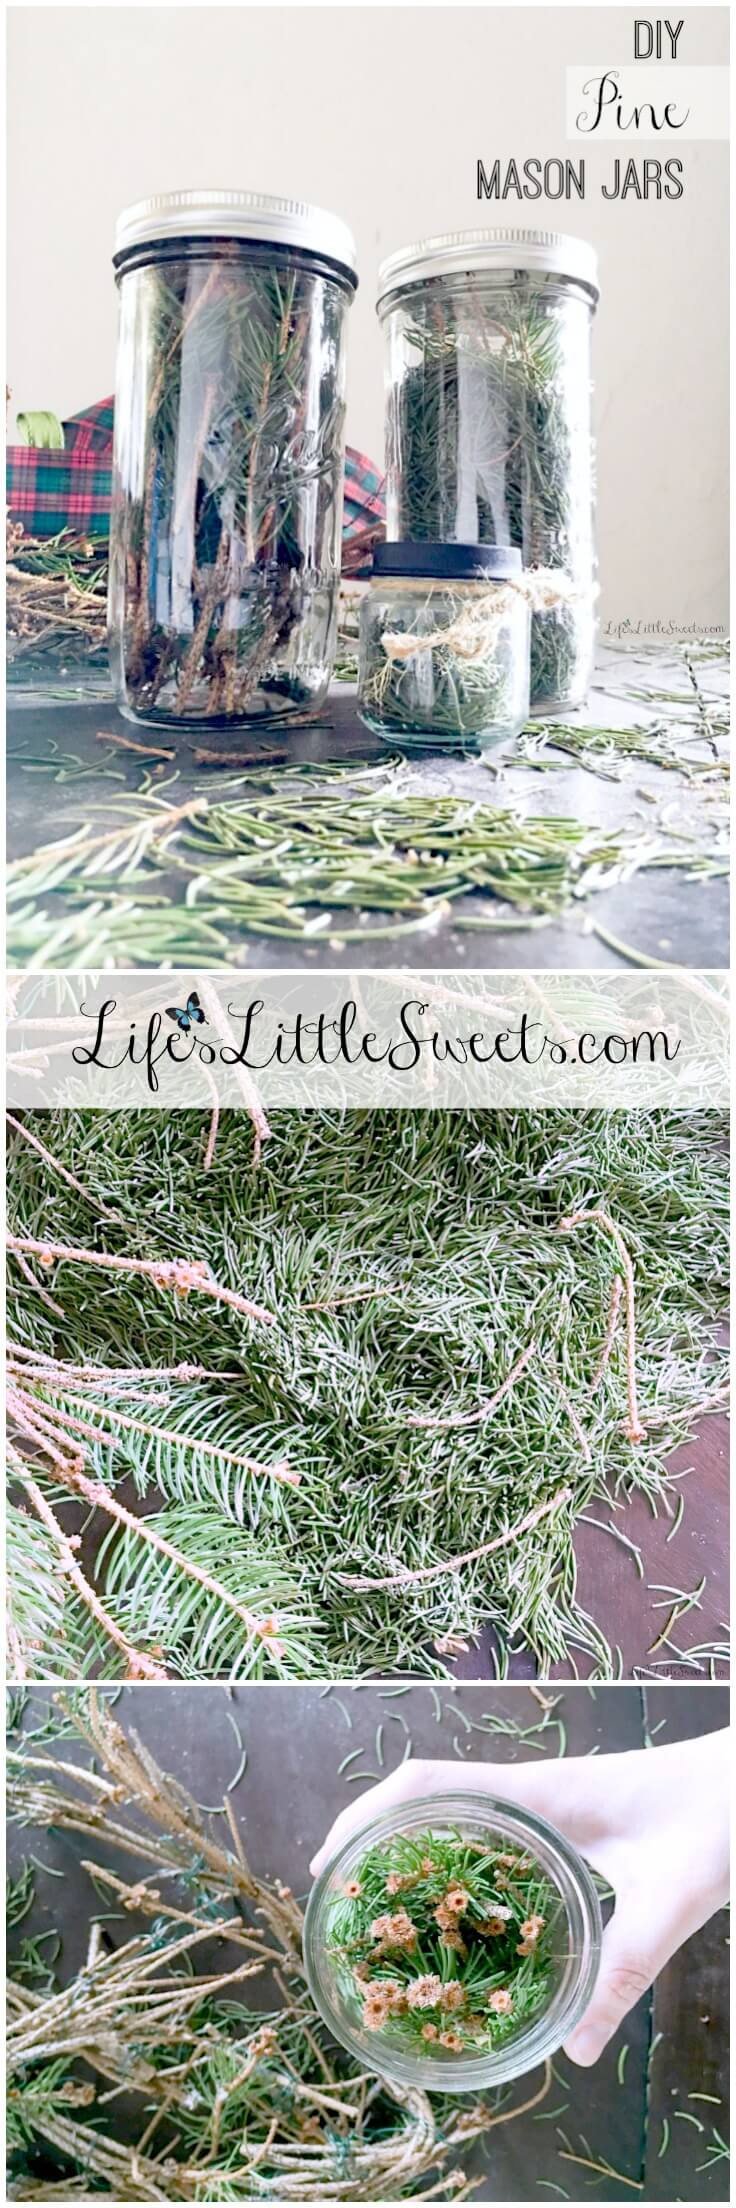 What do you do with that dried out Christmas tree, wreath or garland? Make DIY Pine Mason Jars of course! This resourceful DIY makes a wonderfully scented keepsake of winter holiday memories. Even if those decorations are long gone, just use dry pine twigs, to enjoy the fragrant scent of pine in your home!